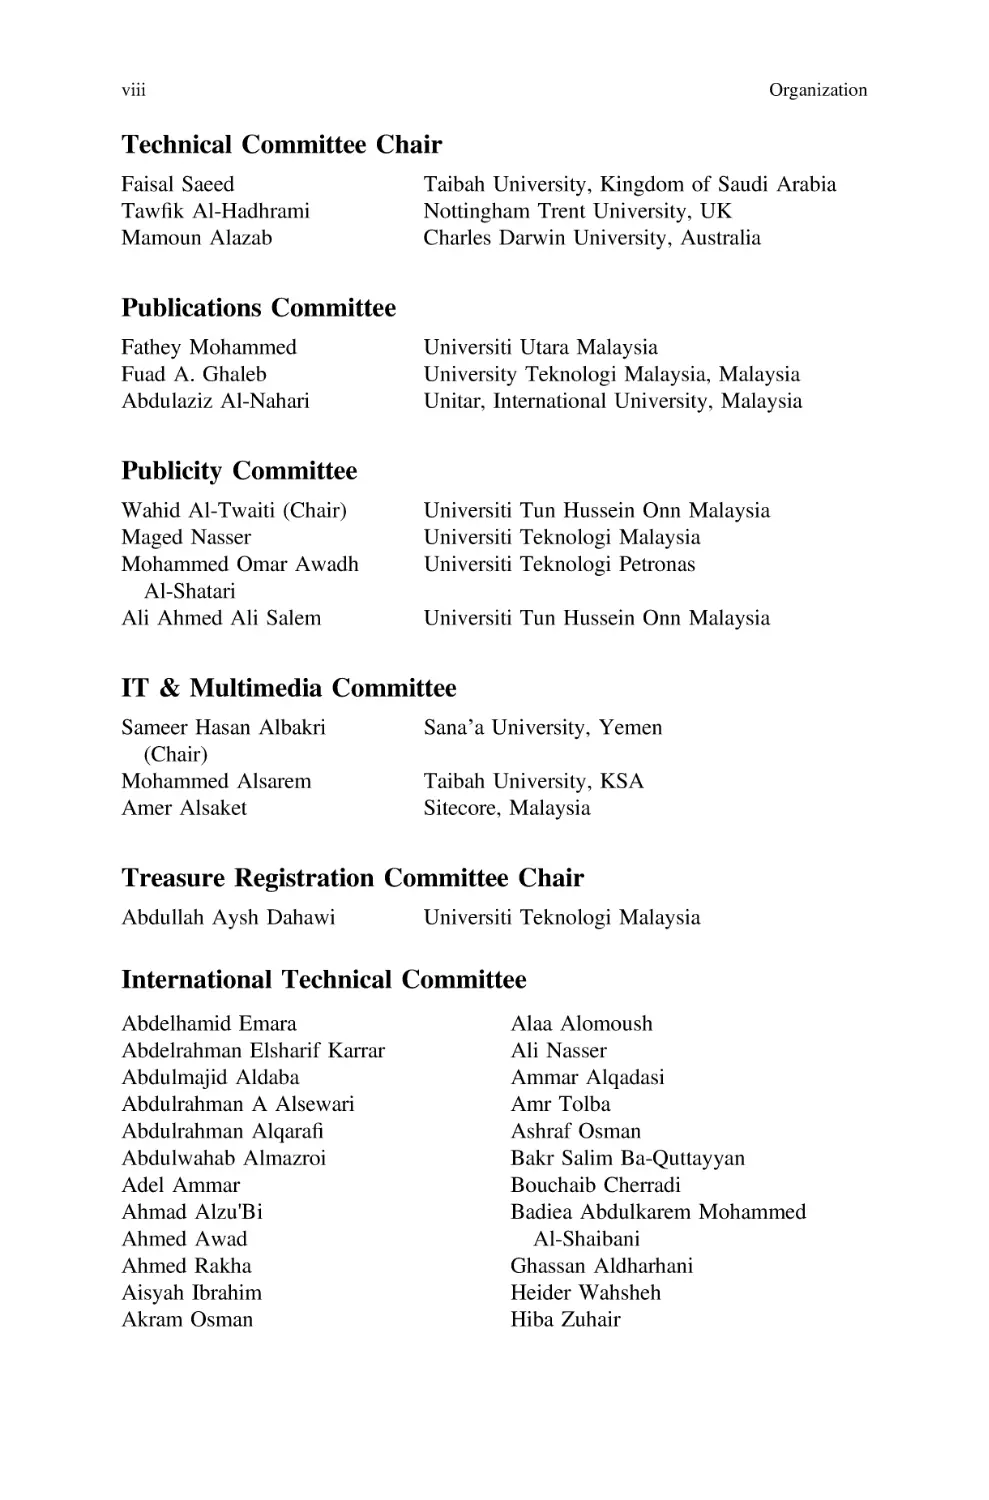 Technical Committee Chair
Publications Committee
Publicity Committee
IT & Multimedia Committee
Treasure Registration Committee Chair
International Technical Committee